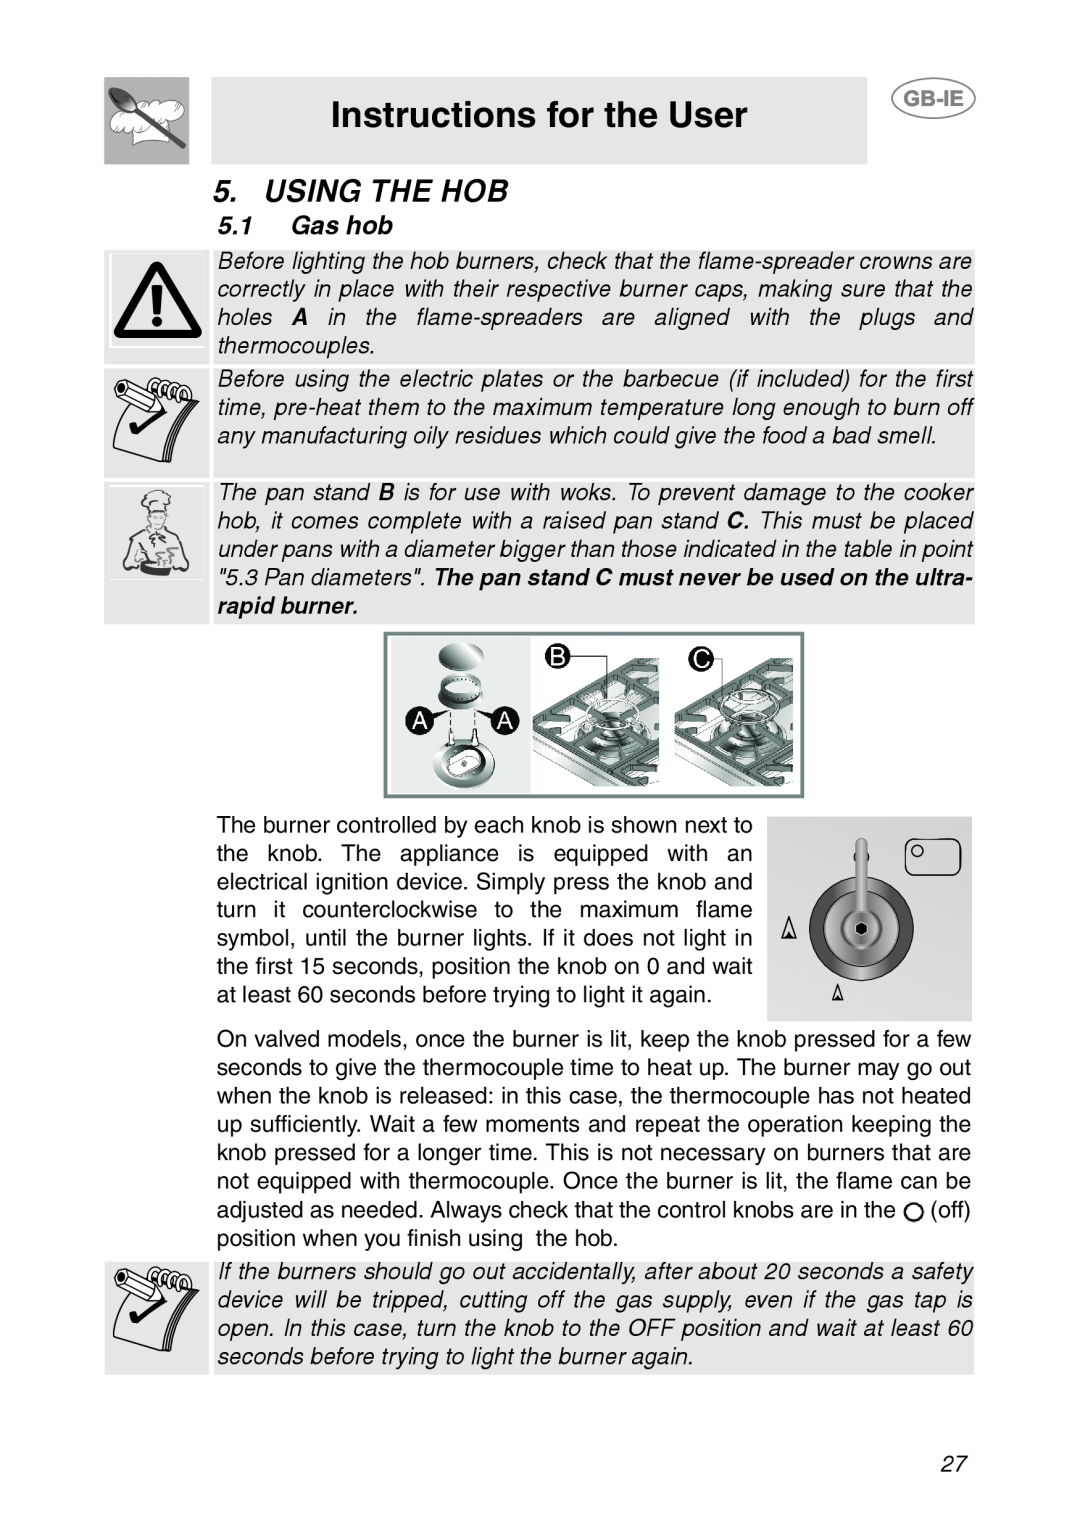 Smeg HB96GXBE3, HB96CSS-3 manual Using The Hob, Instructions for the User, 5.1Gas hob 